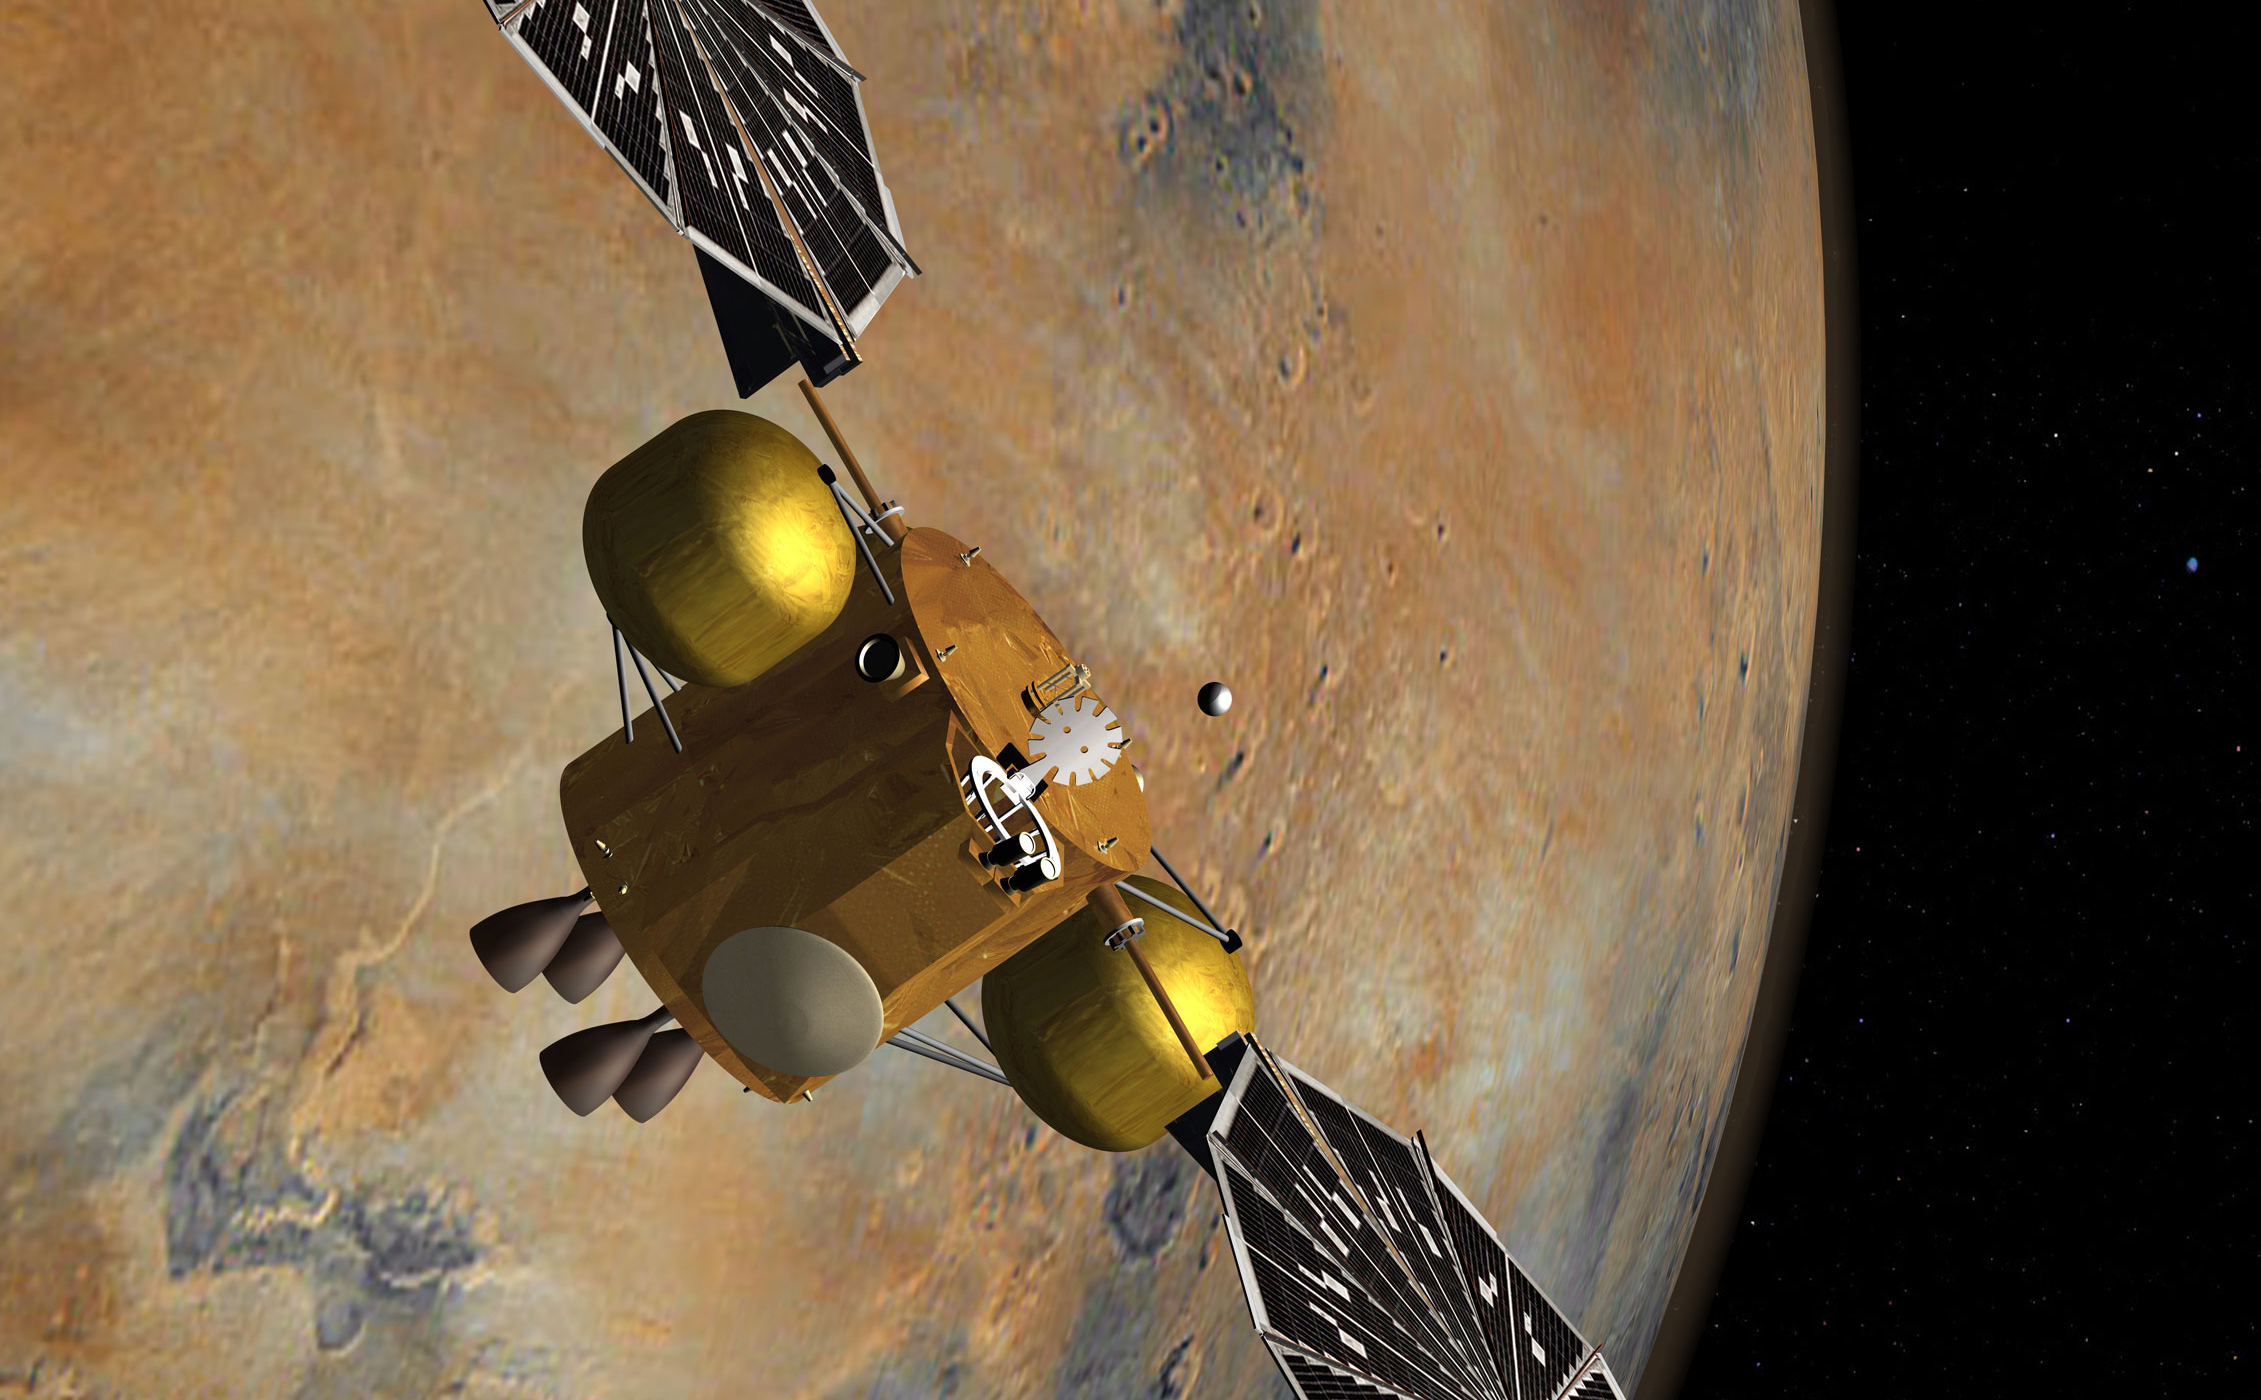 This artist's concept of a proposed Mars sample return mission portrays the capture of a collection of Martian samples by a spacecraft orbiting Mars.